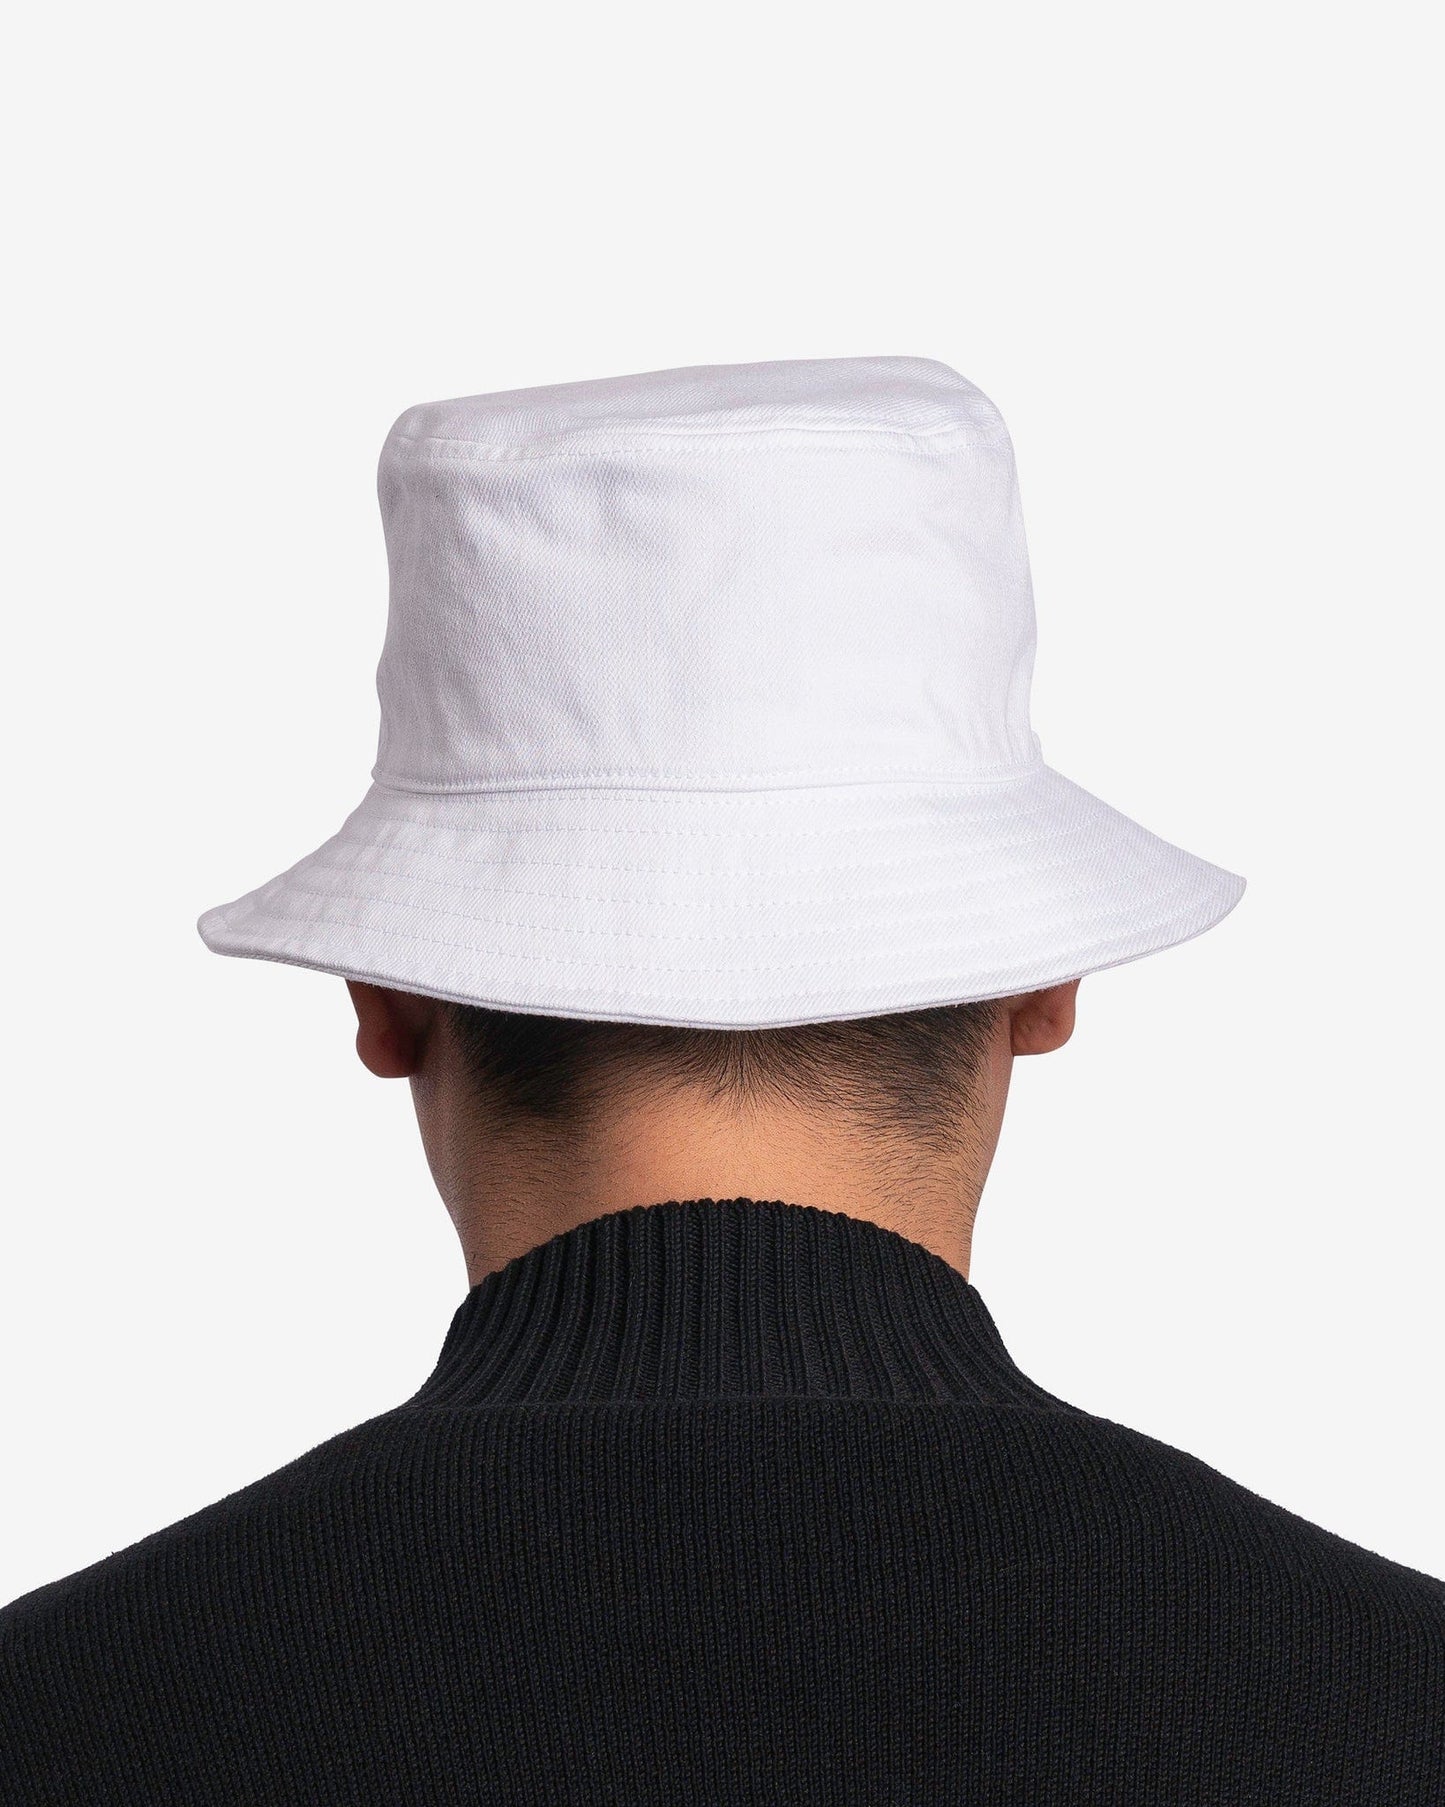 Raf Simons Men's Hats Small Leather Patch Bucket Hat in White